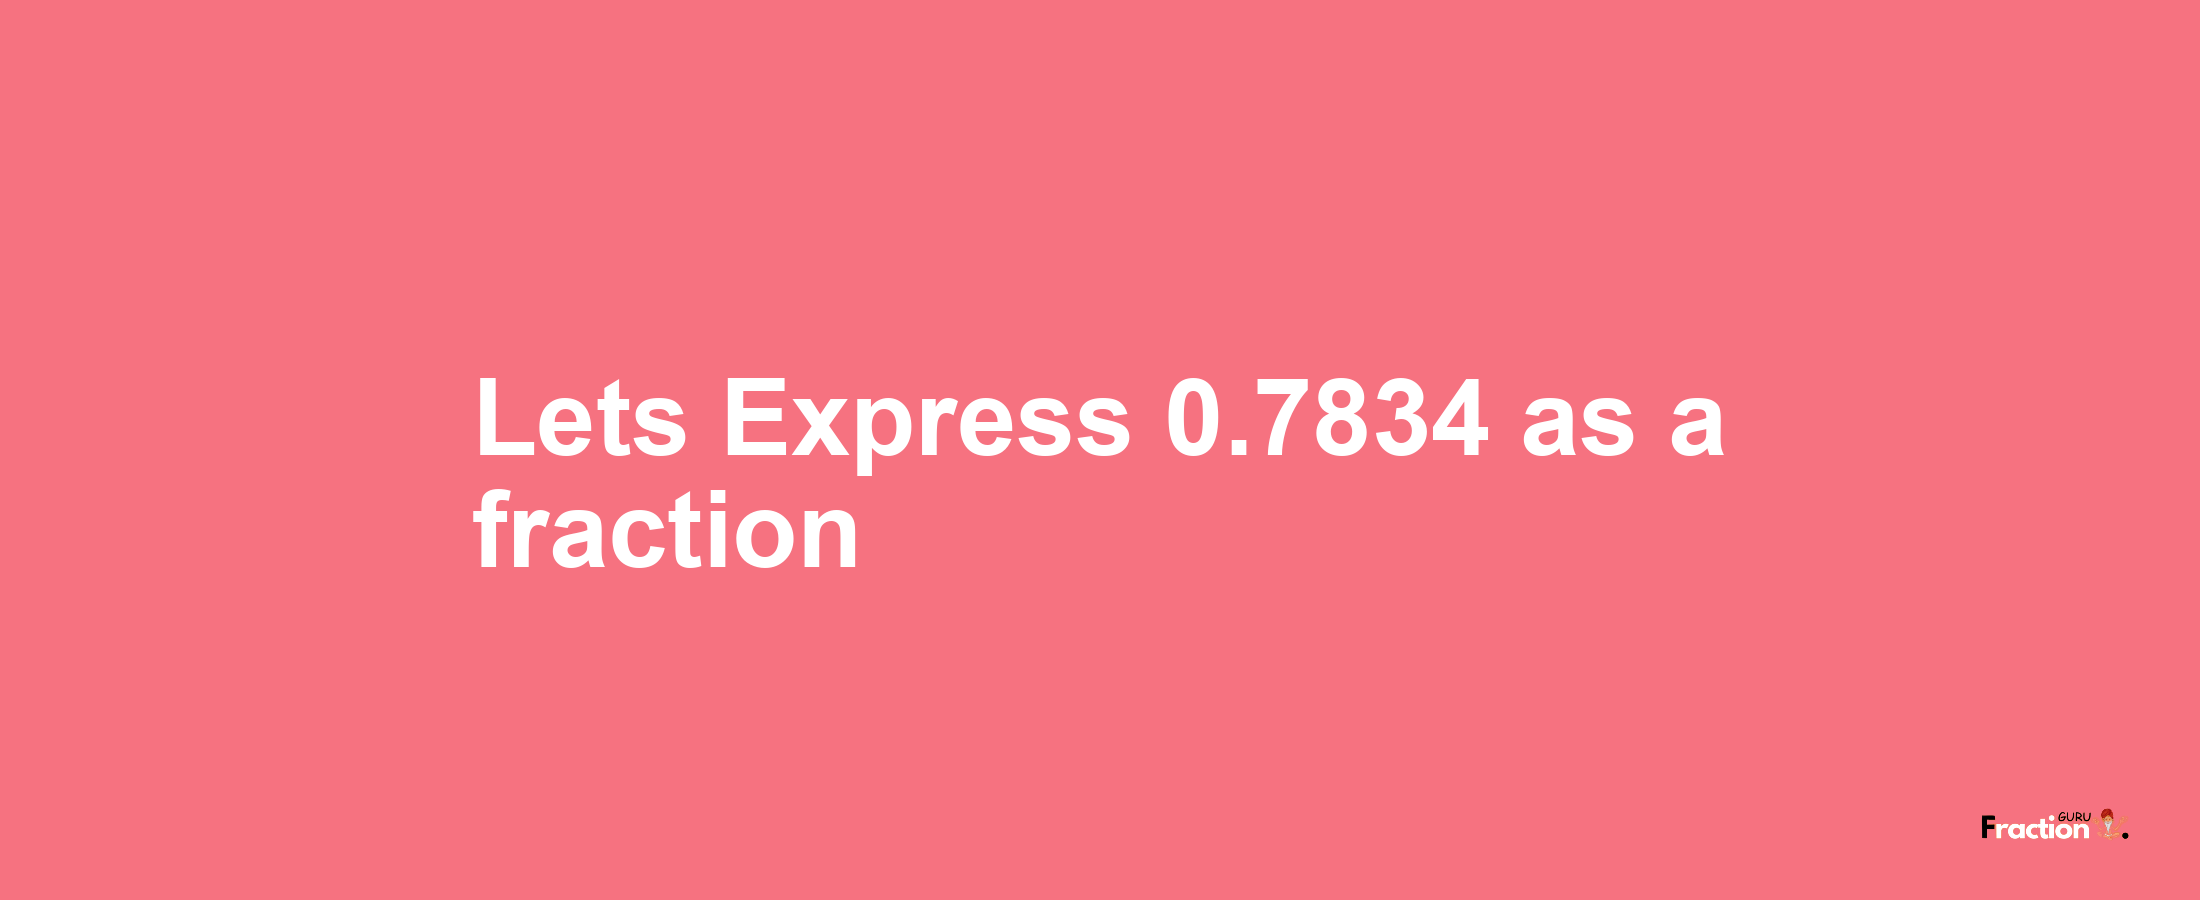 Lets Express 0.7834 as afraction